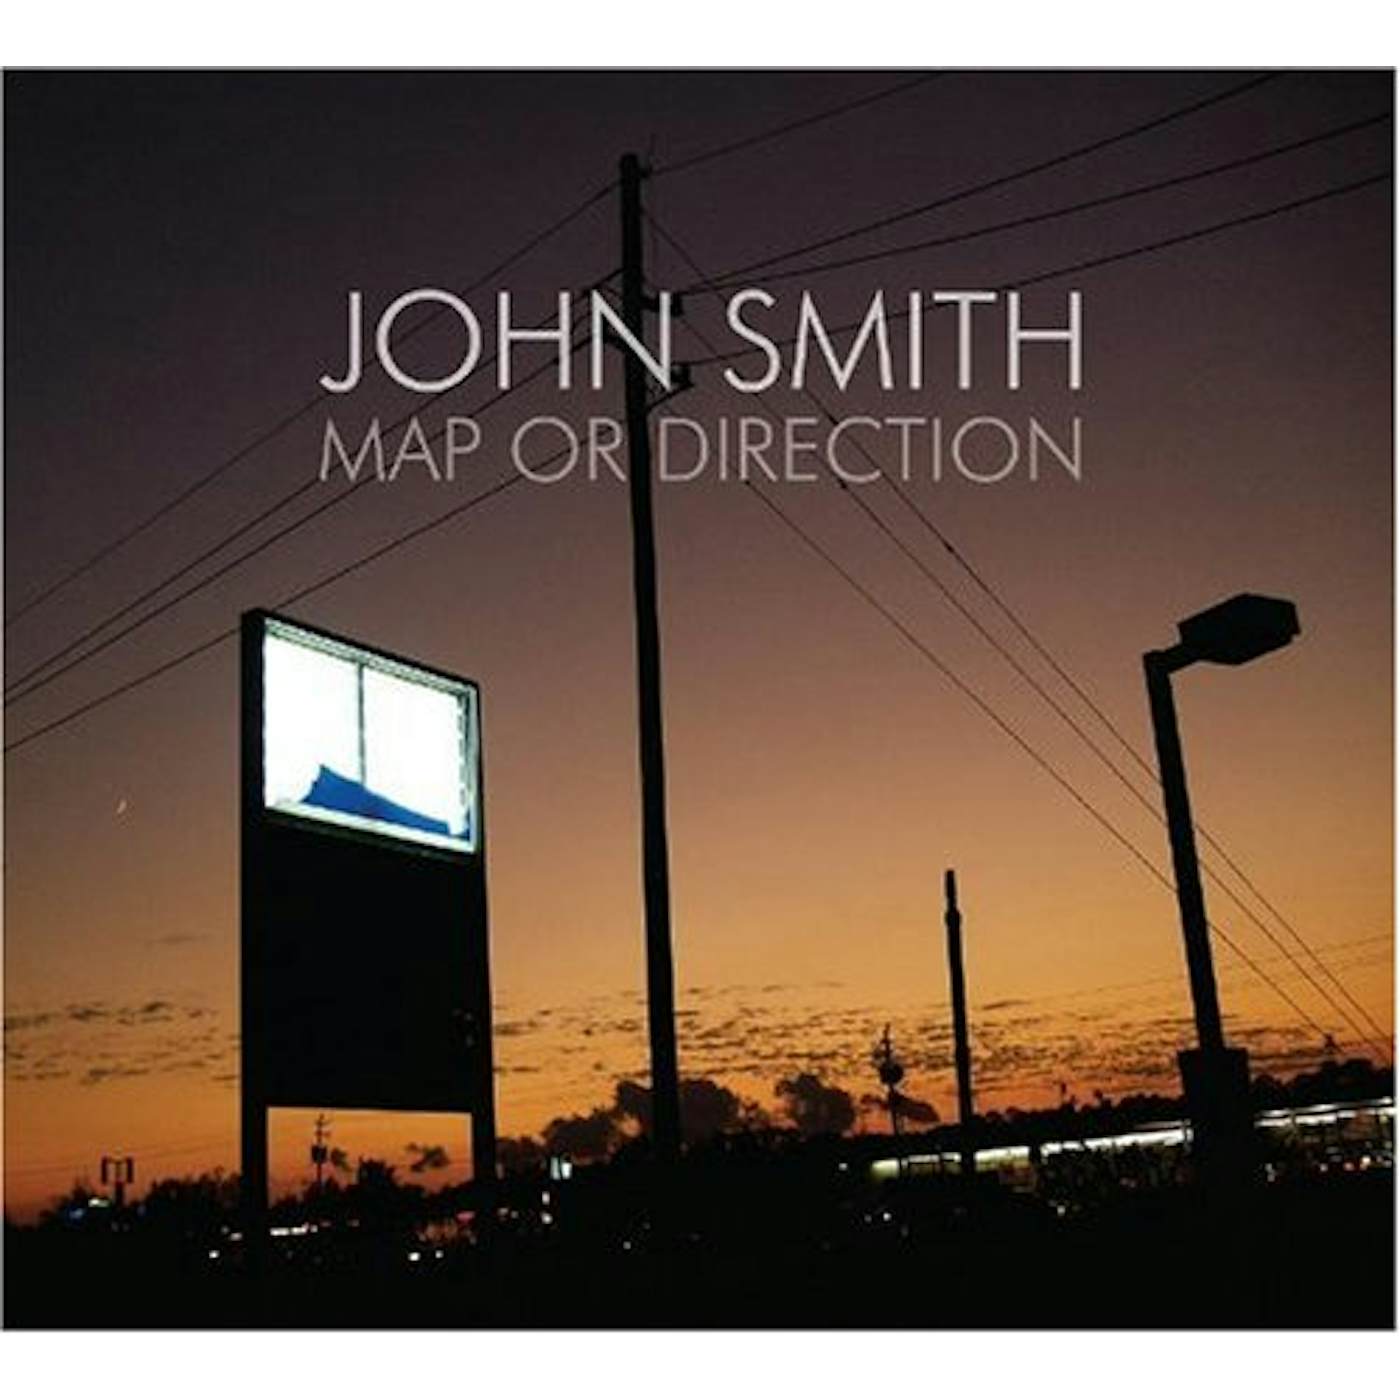 John Smith MAP OR DIRECTION CD